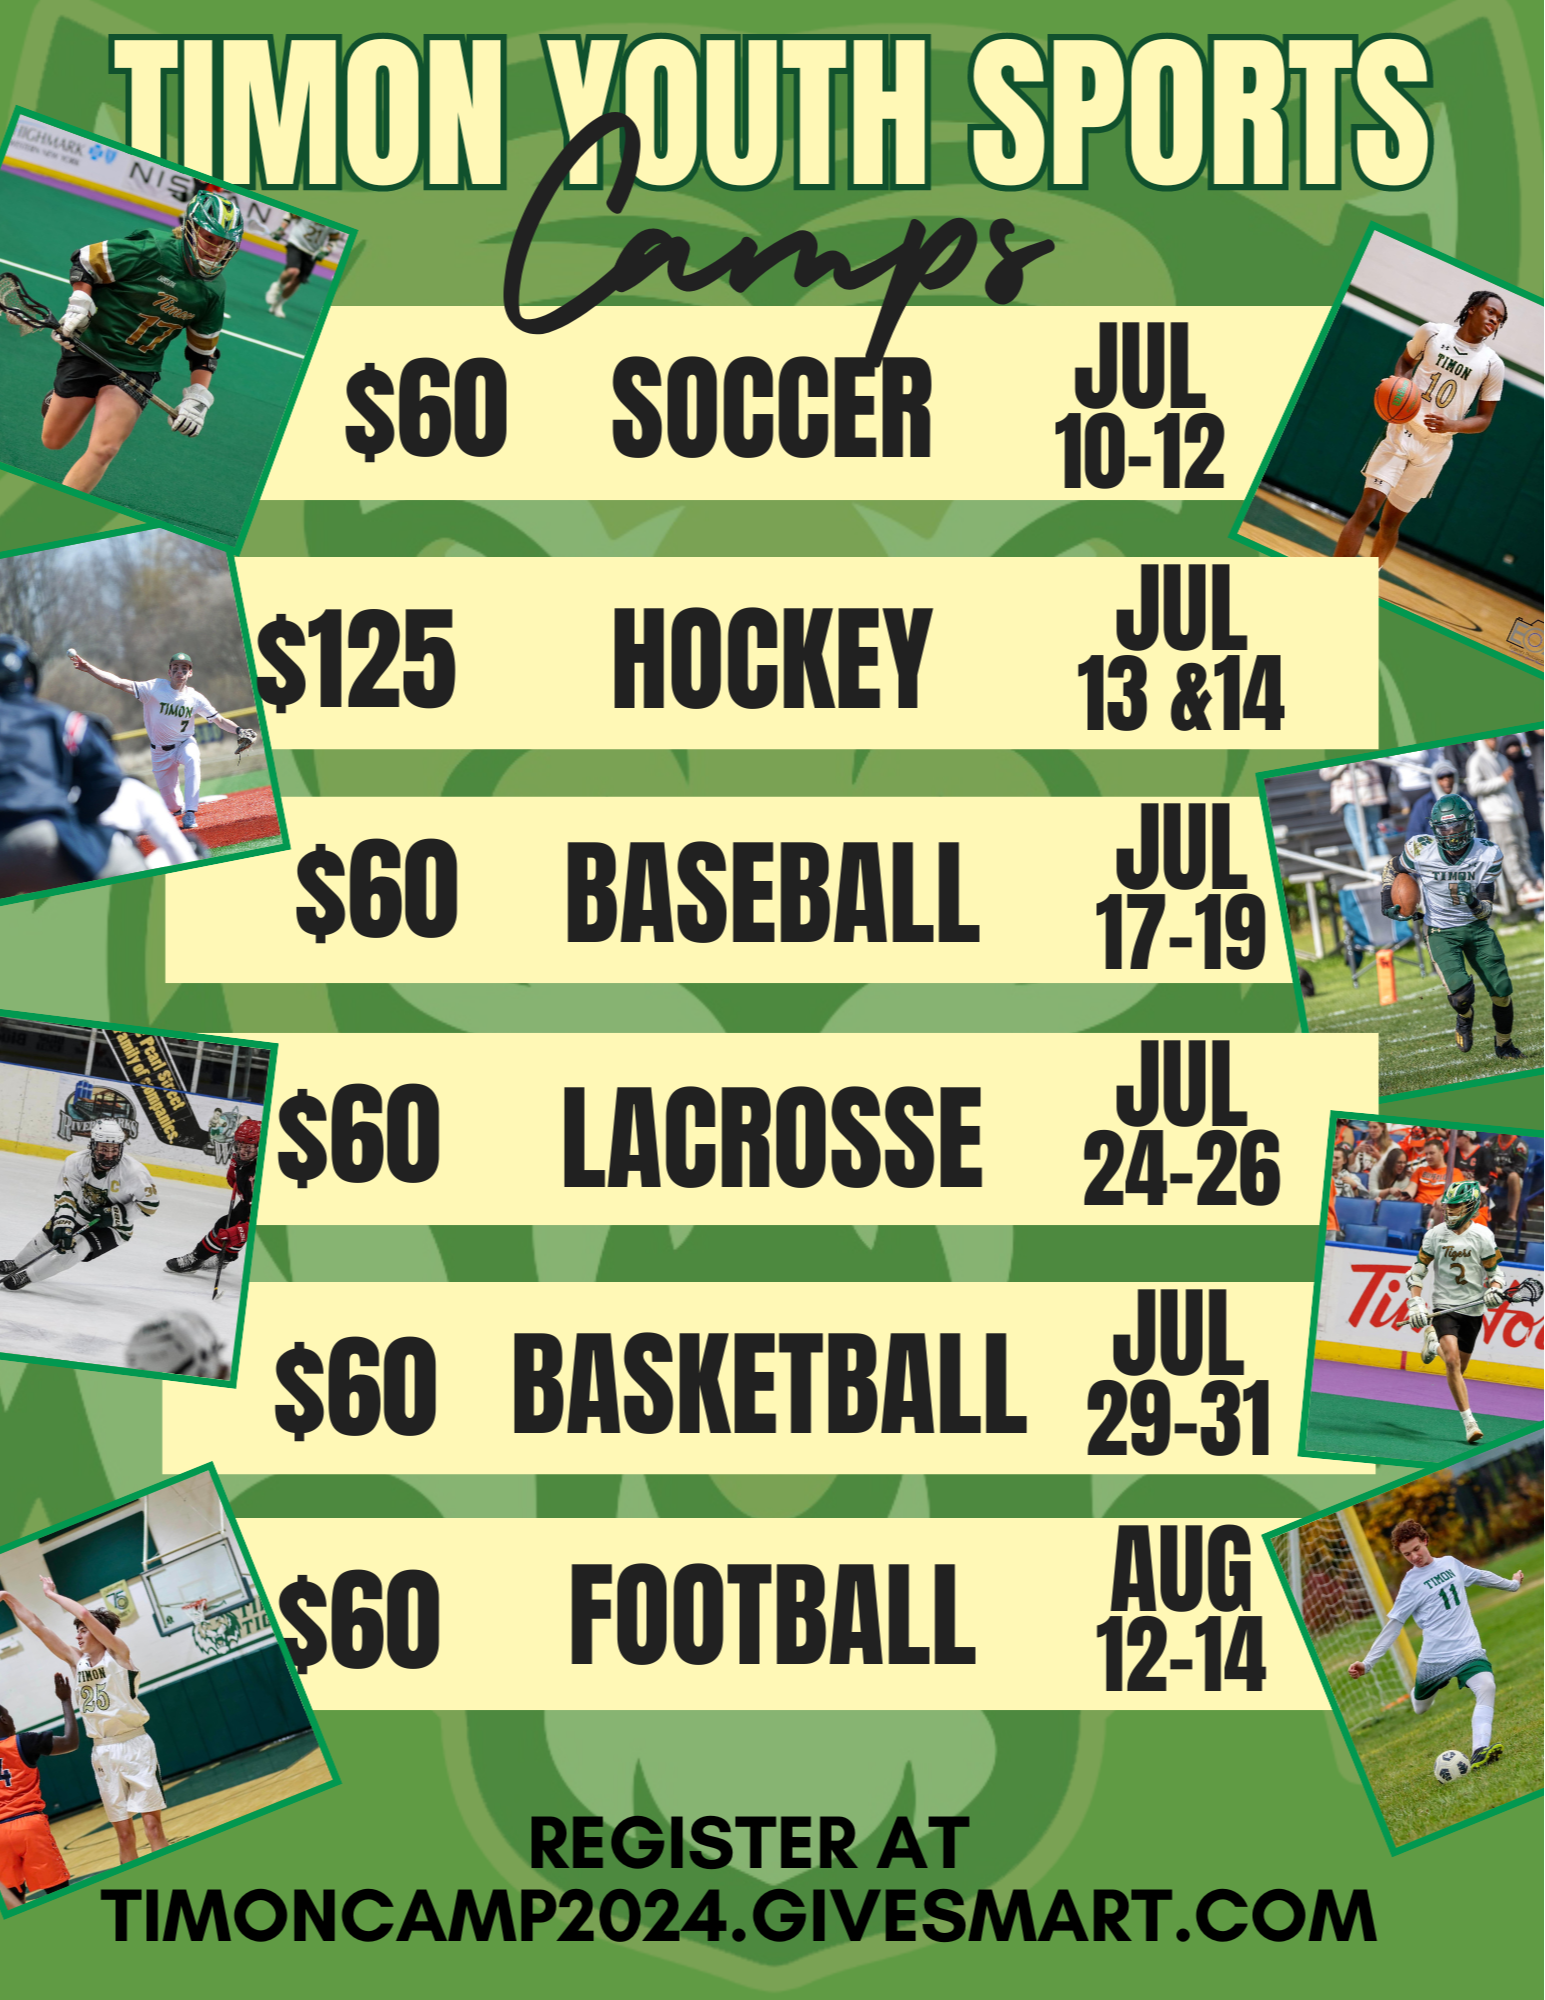 Timon Summer Sports Camps schedule